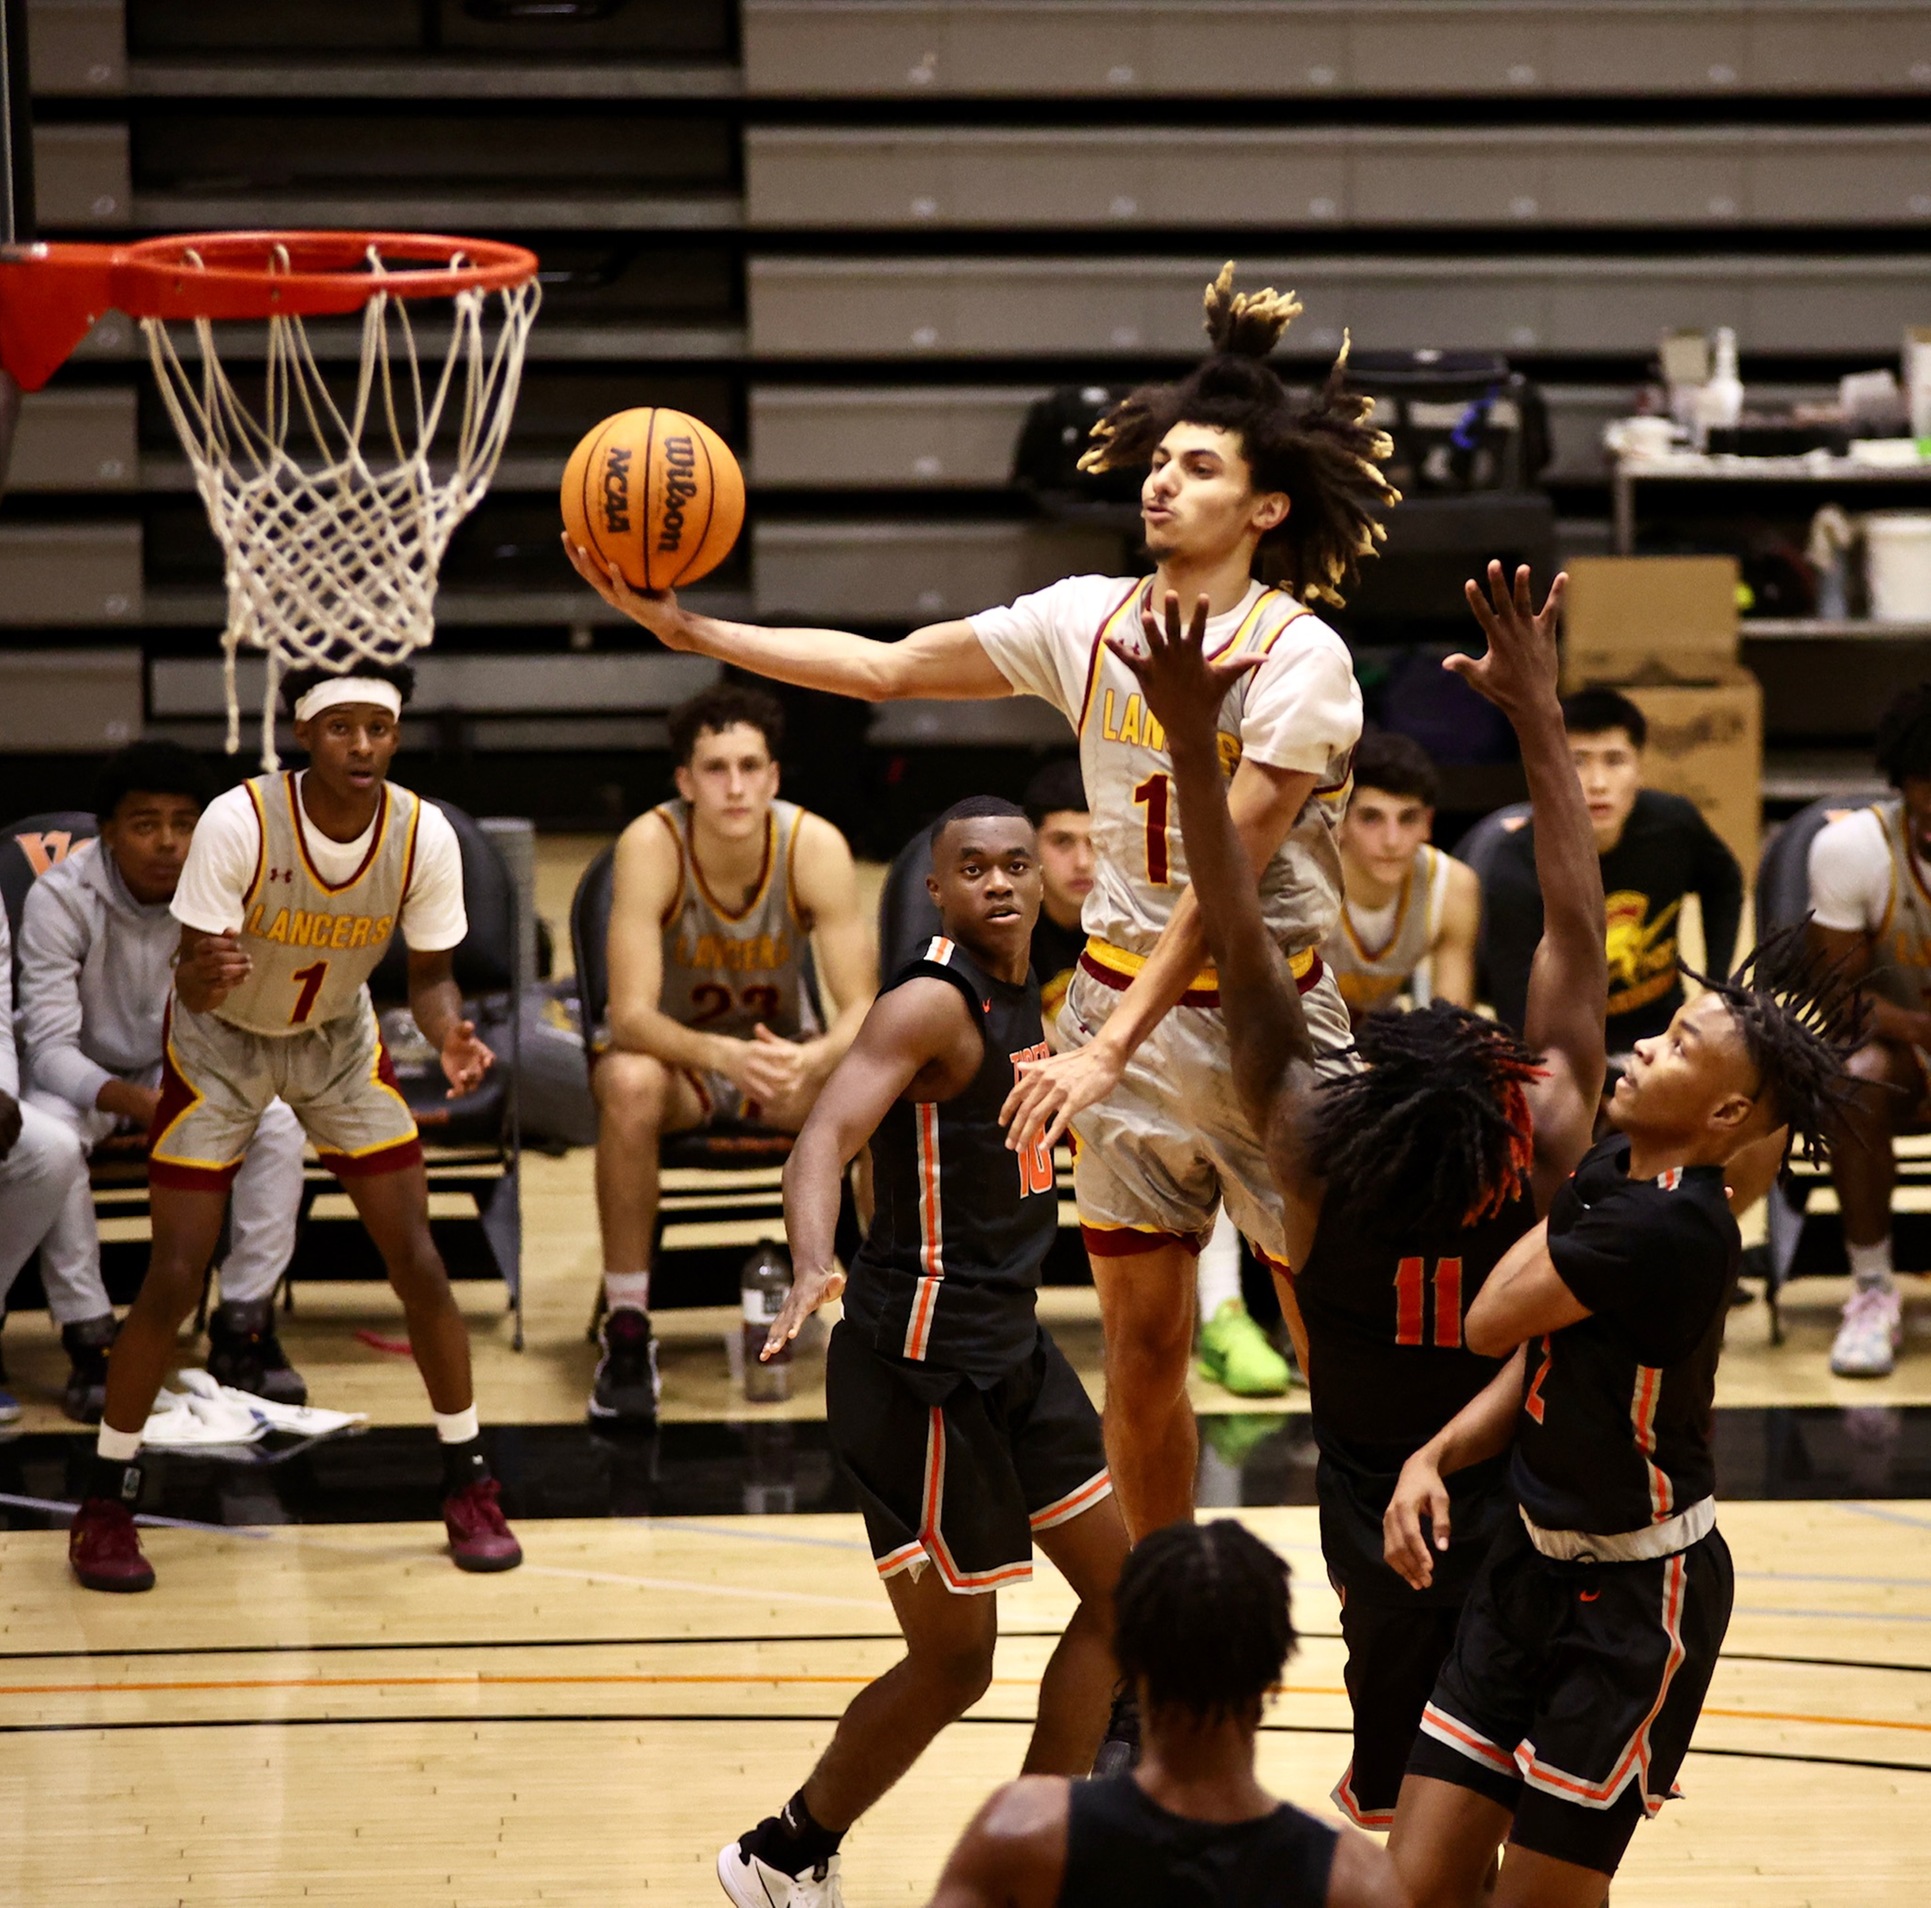 Jayden Winfrey goes up for the shot during the team's season opener v. Riverside at Ventura College on Thursday (photo by Michael Watkins).